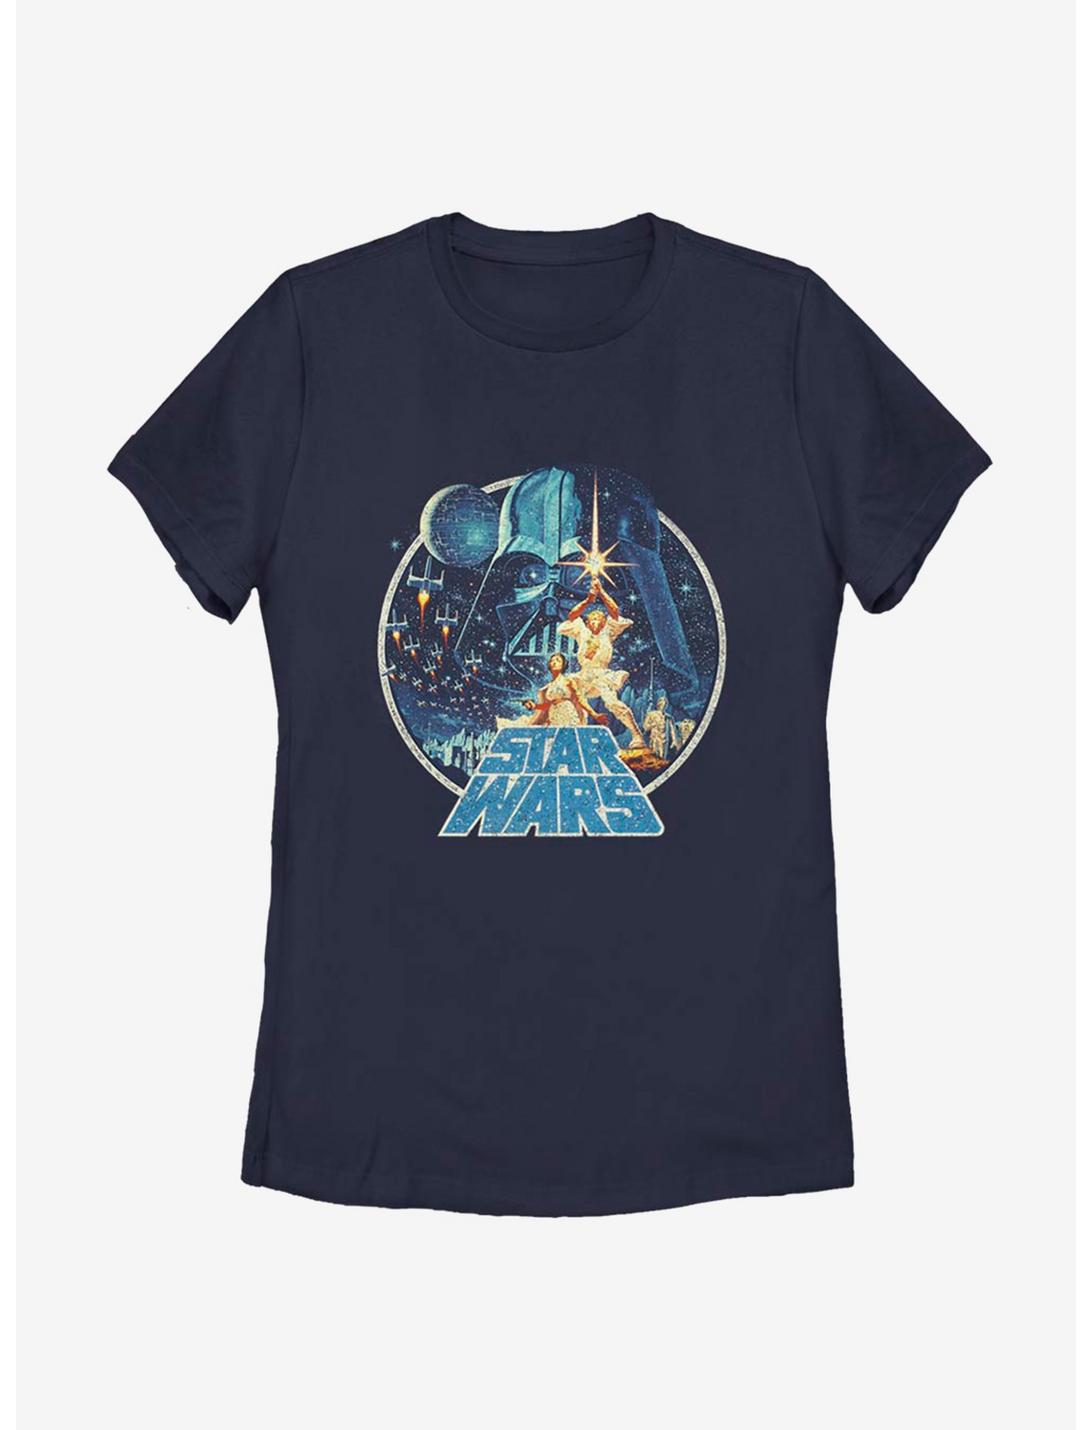 Star Wars Vintage Victory Complete Womens T-Shirt, NAVY, hi-res